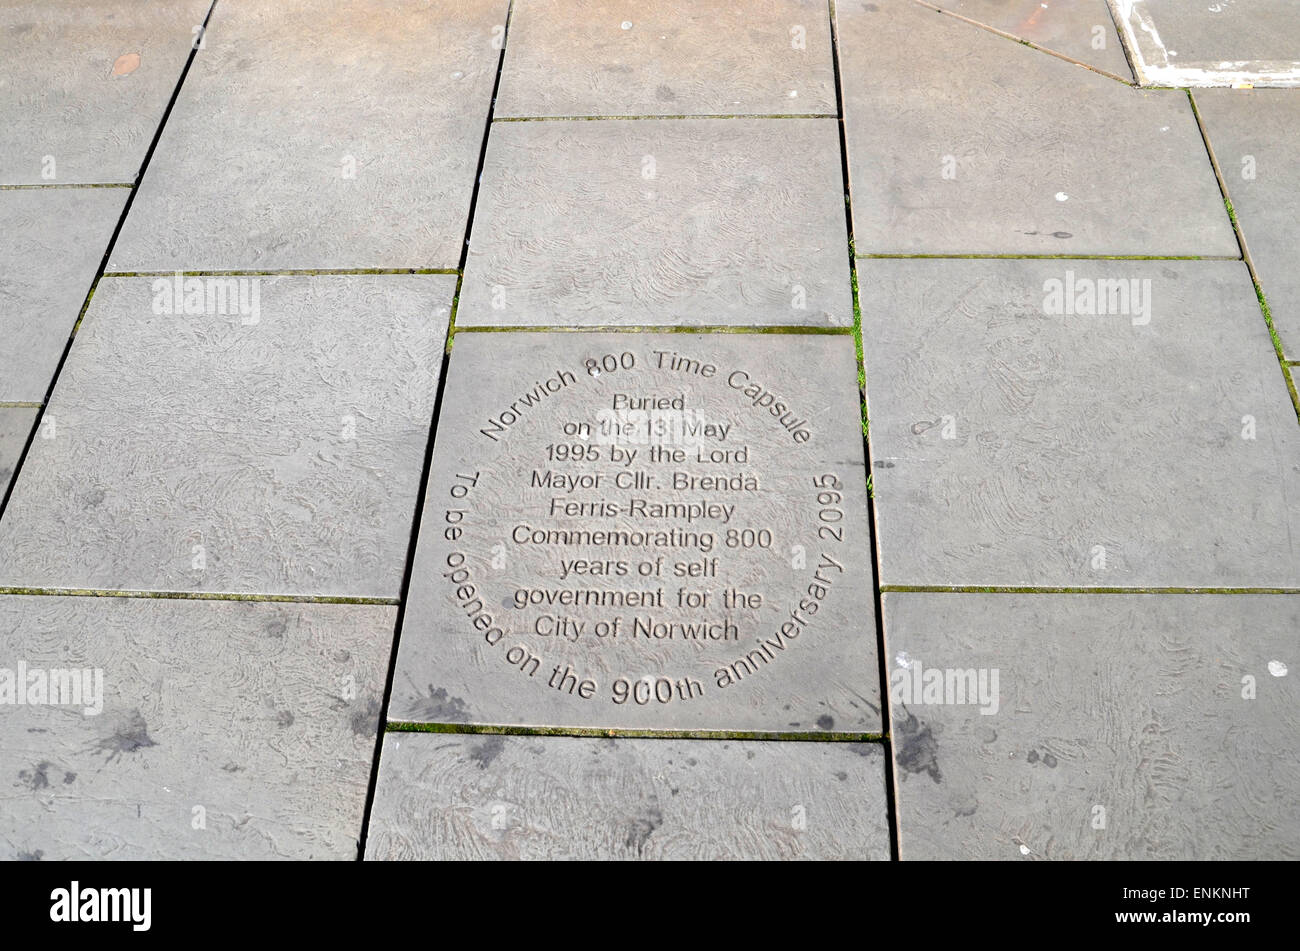 Plaque commemorating 800 years of self government, Norwich April 2015 Stock Photo